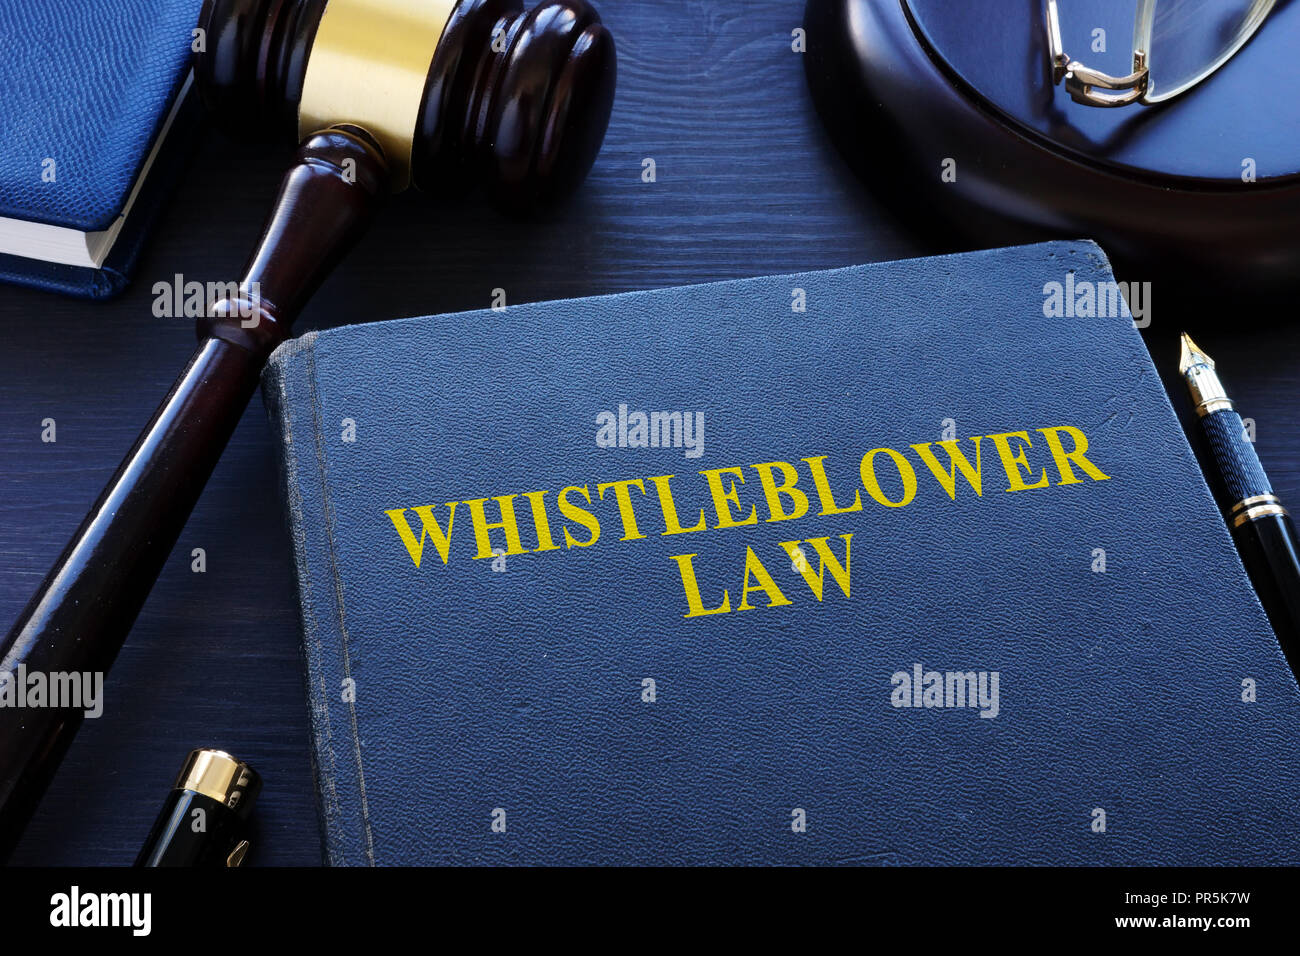 Whistleblower law book and gavel in a court. Stock Photo